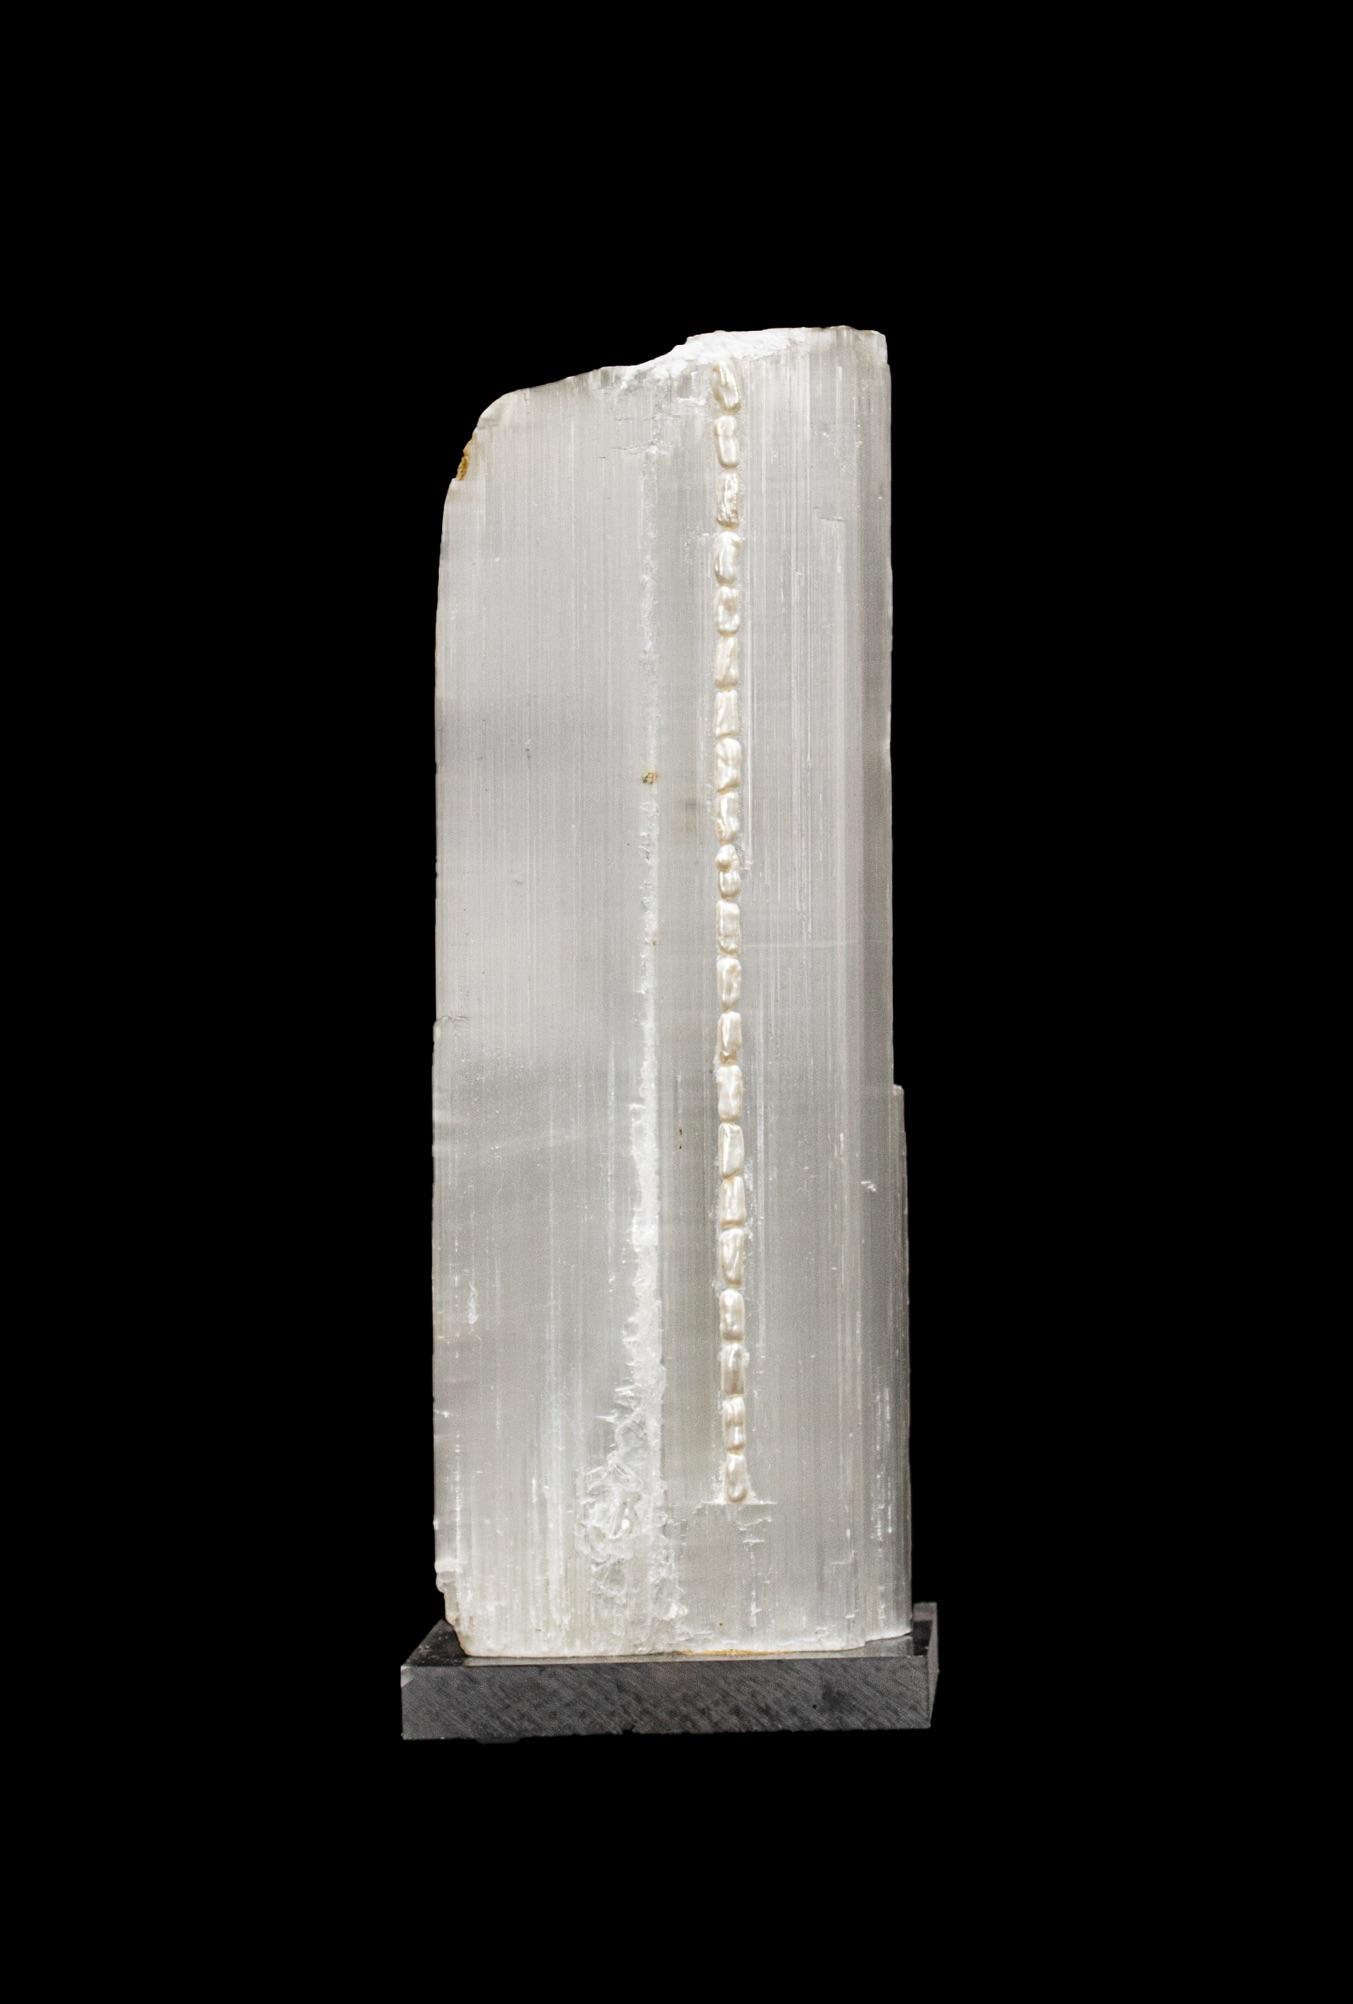 Ruler Selenite with natural forming baroque pearls on a lucite base. Ruler selenite or 